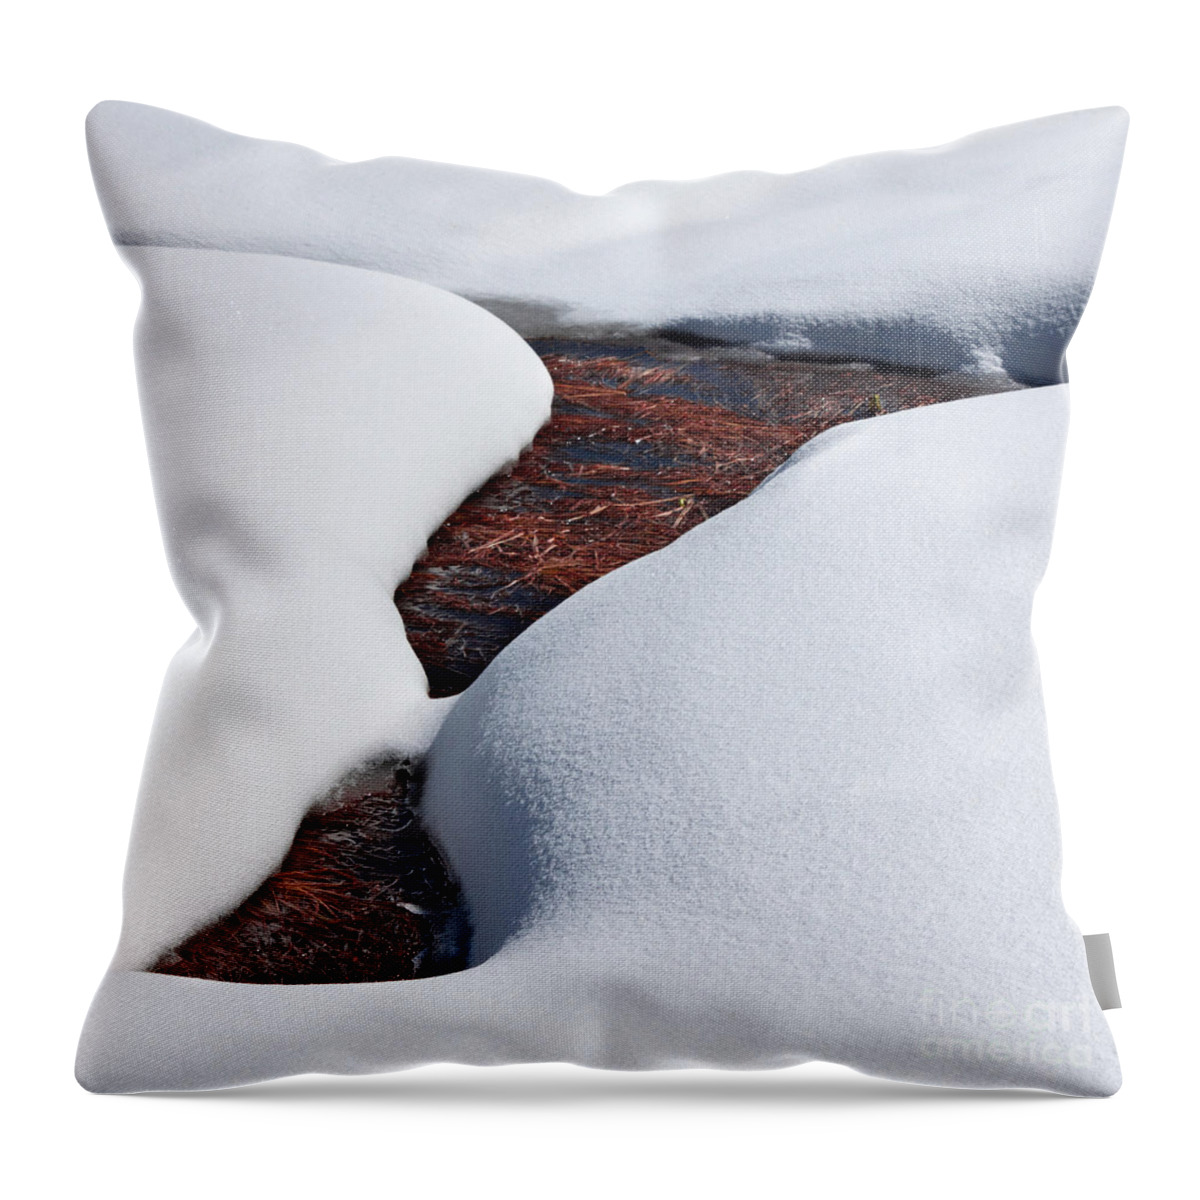 Snow Throw Pillow featuring the photograph Spooner Meadow Melt by L J Oakes